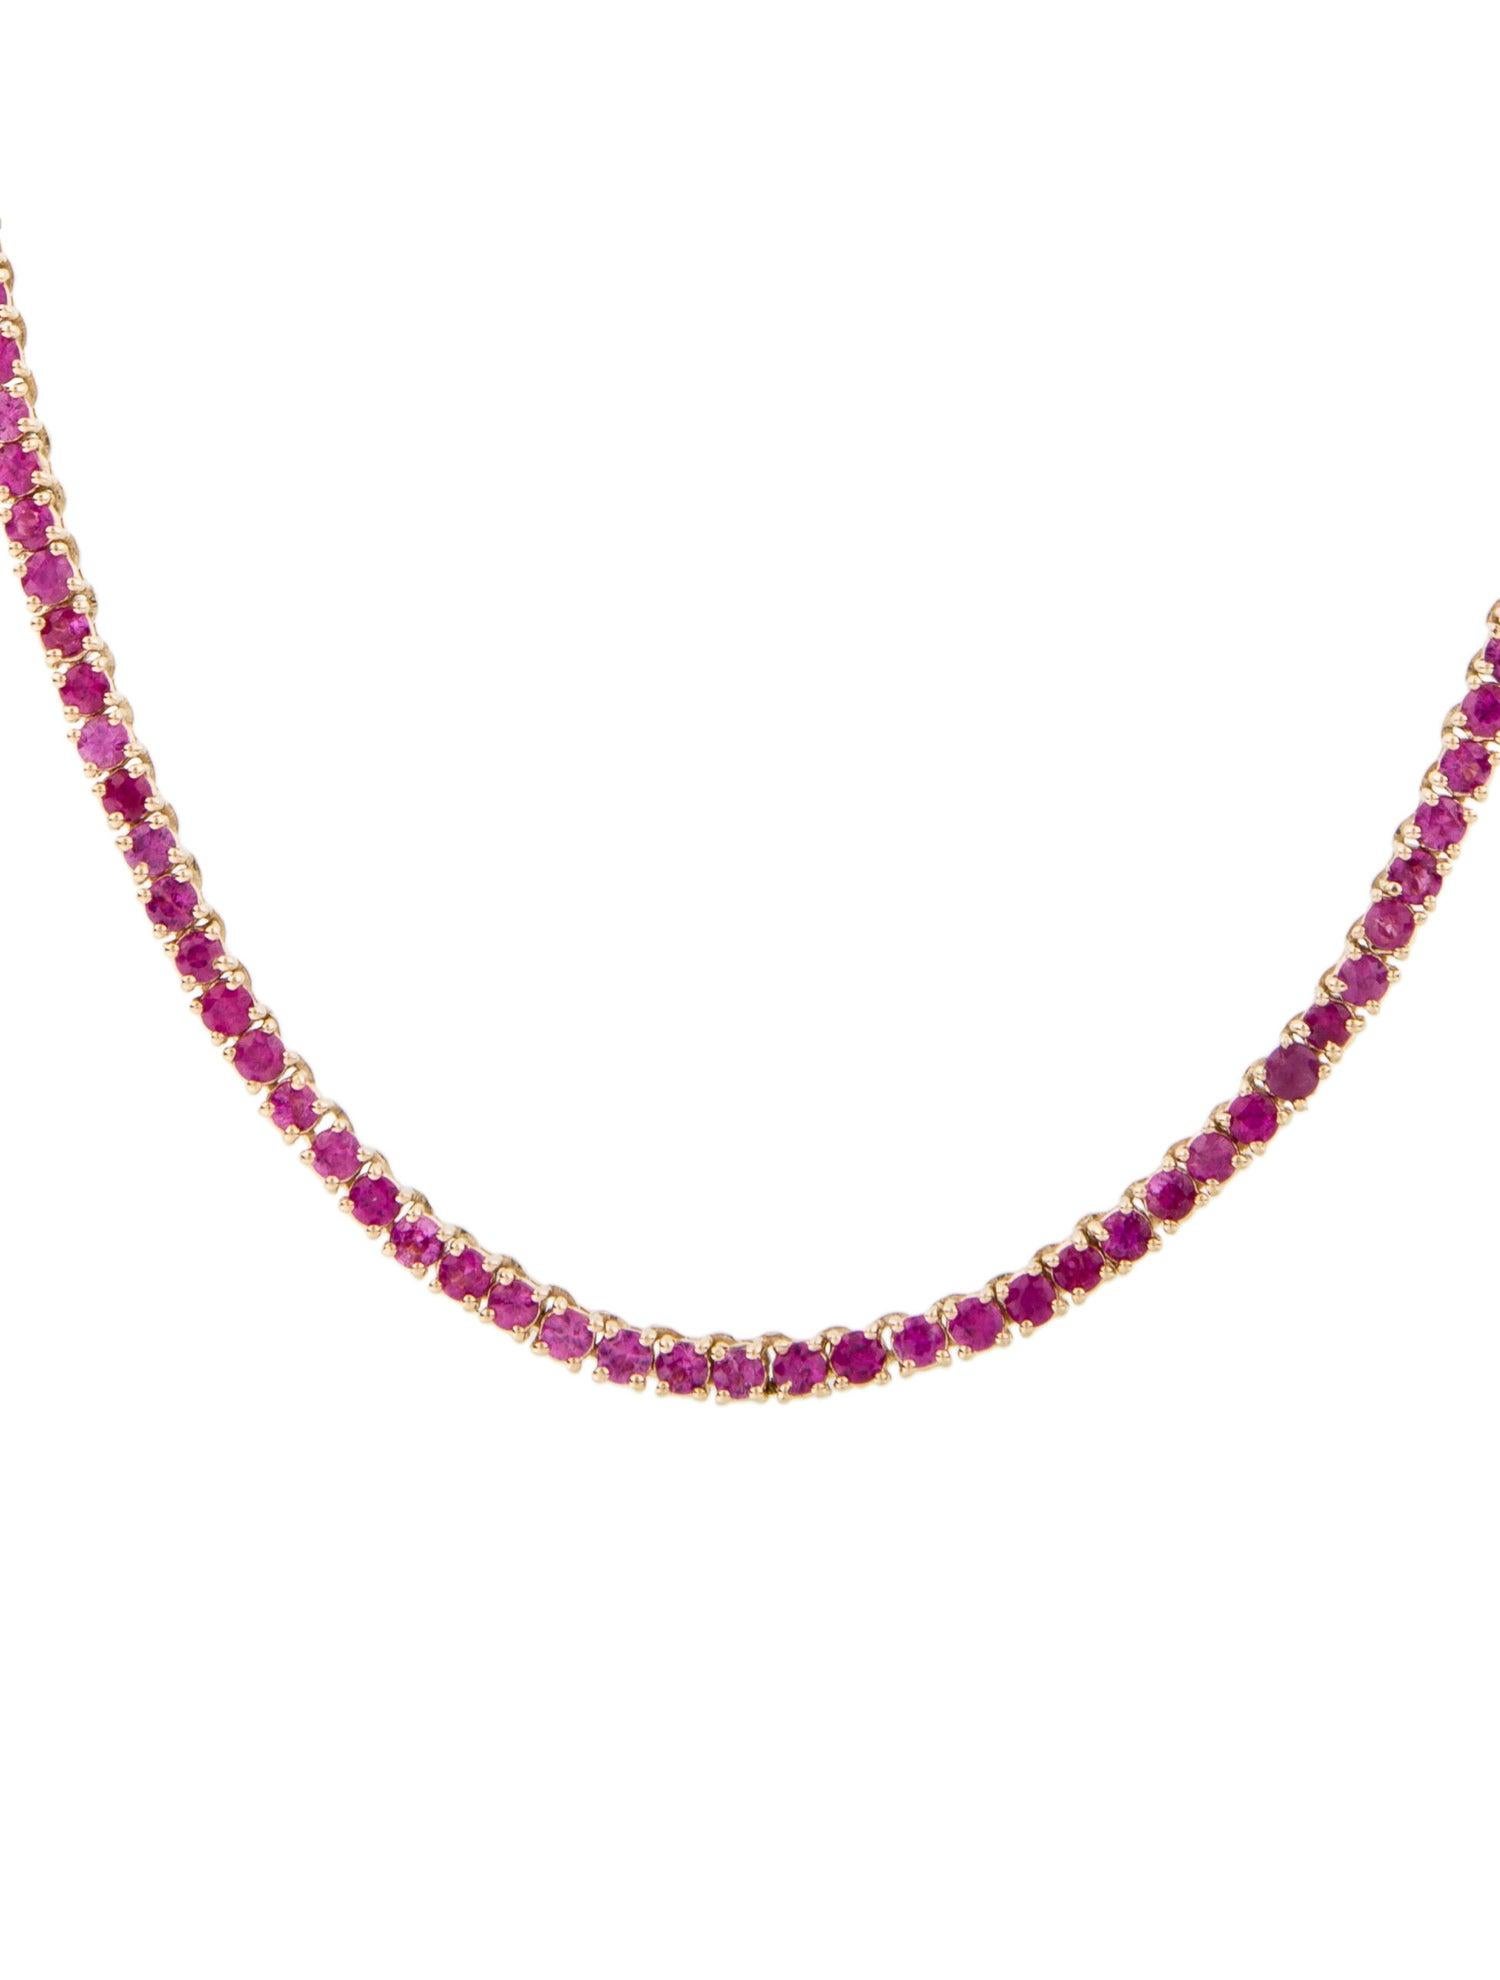 Evoke the fiery allure of passion and the enchantment of nature with our Blooms of Passion Ruby Necklace, a masterpiece crafted. Immerse yourself in a world where the lush red hues of rubies intertwine with the bloom of emotions, capturing the very